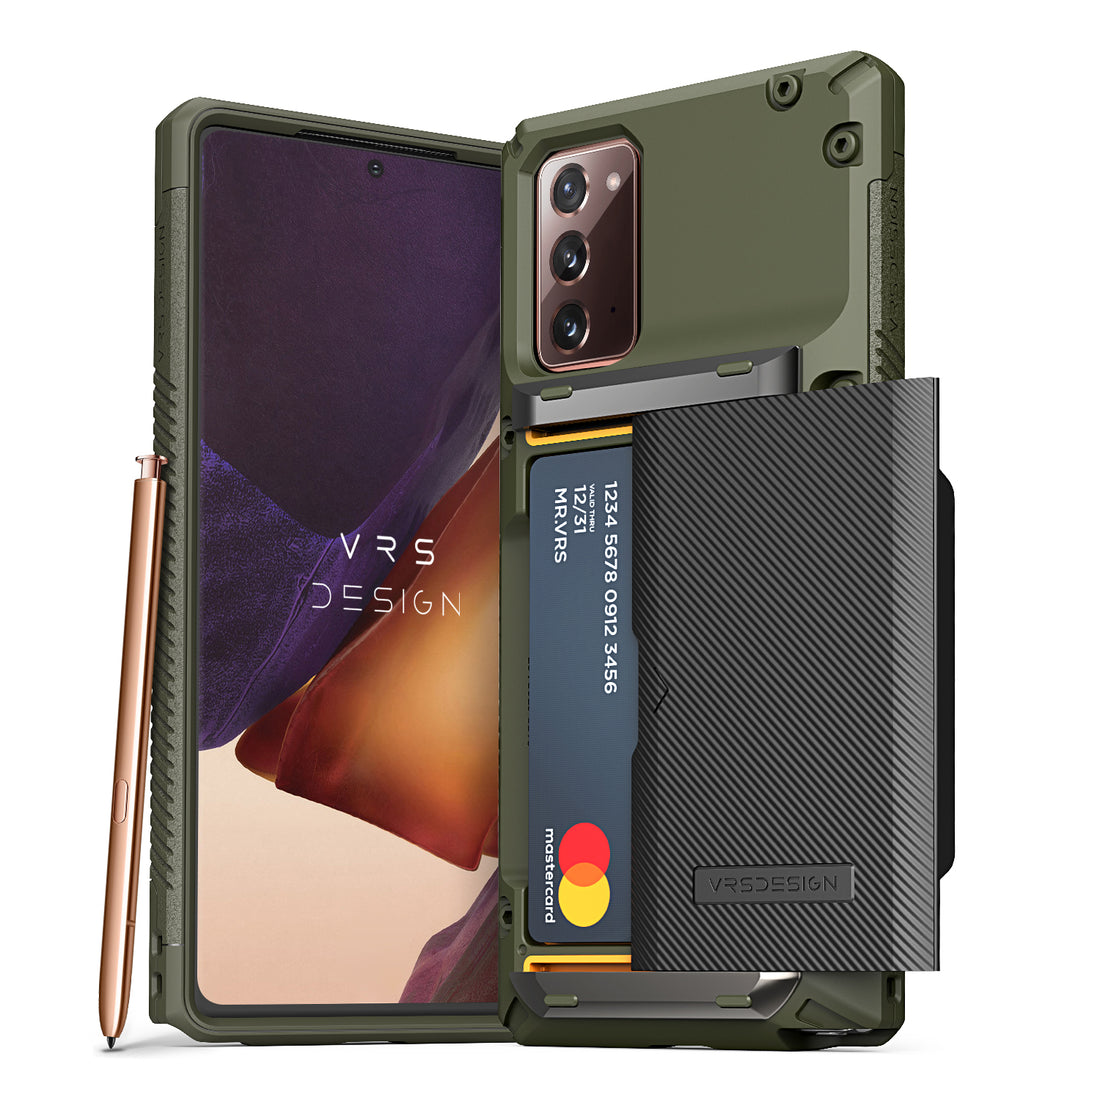 Samsung Galaxy Note 20 Plus wallet rugged case with multiple durable and convenient card slot with sleek minimalism by VRS